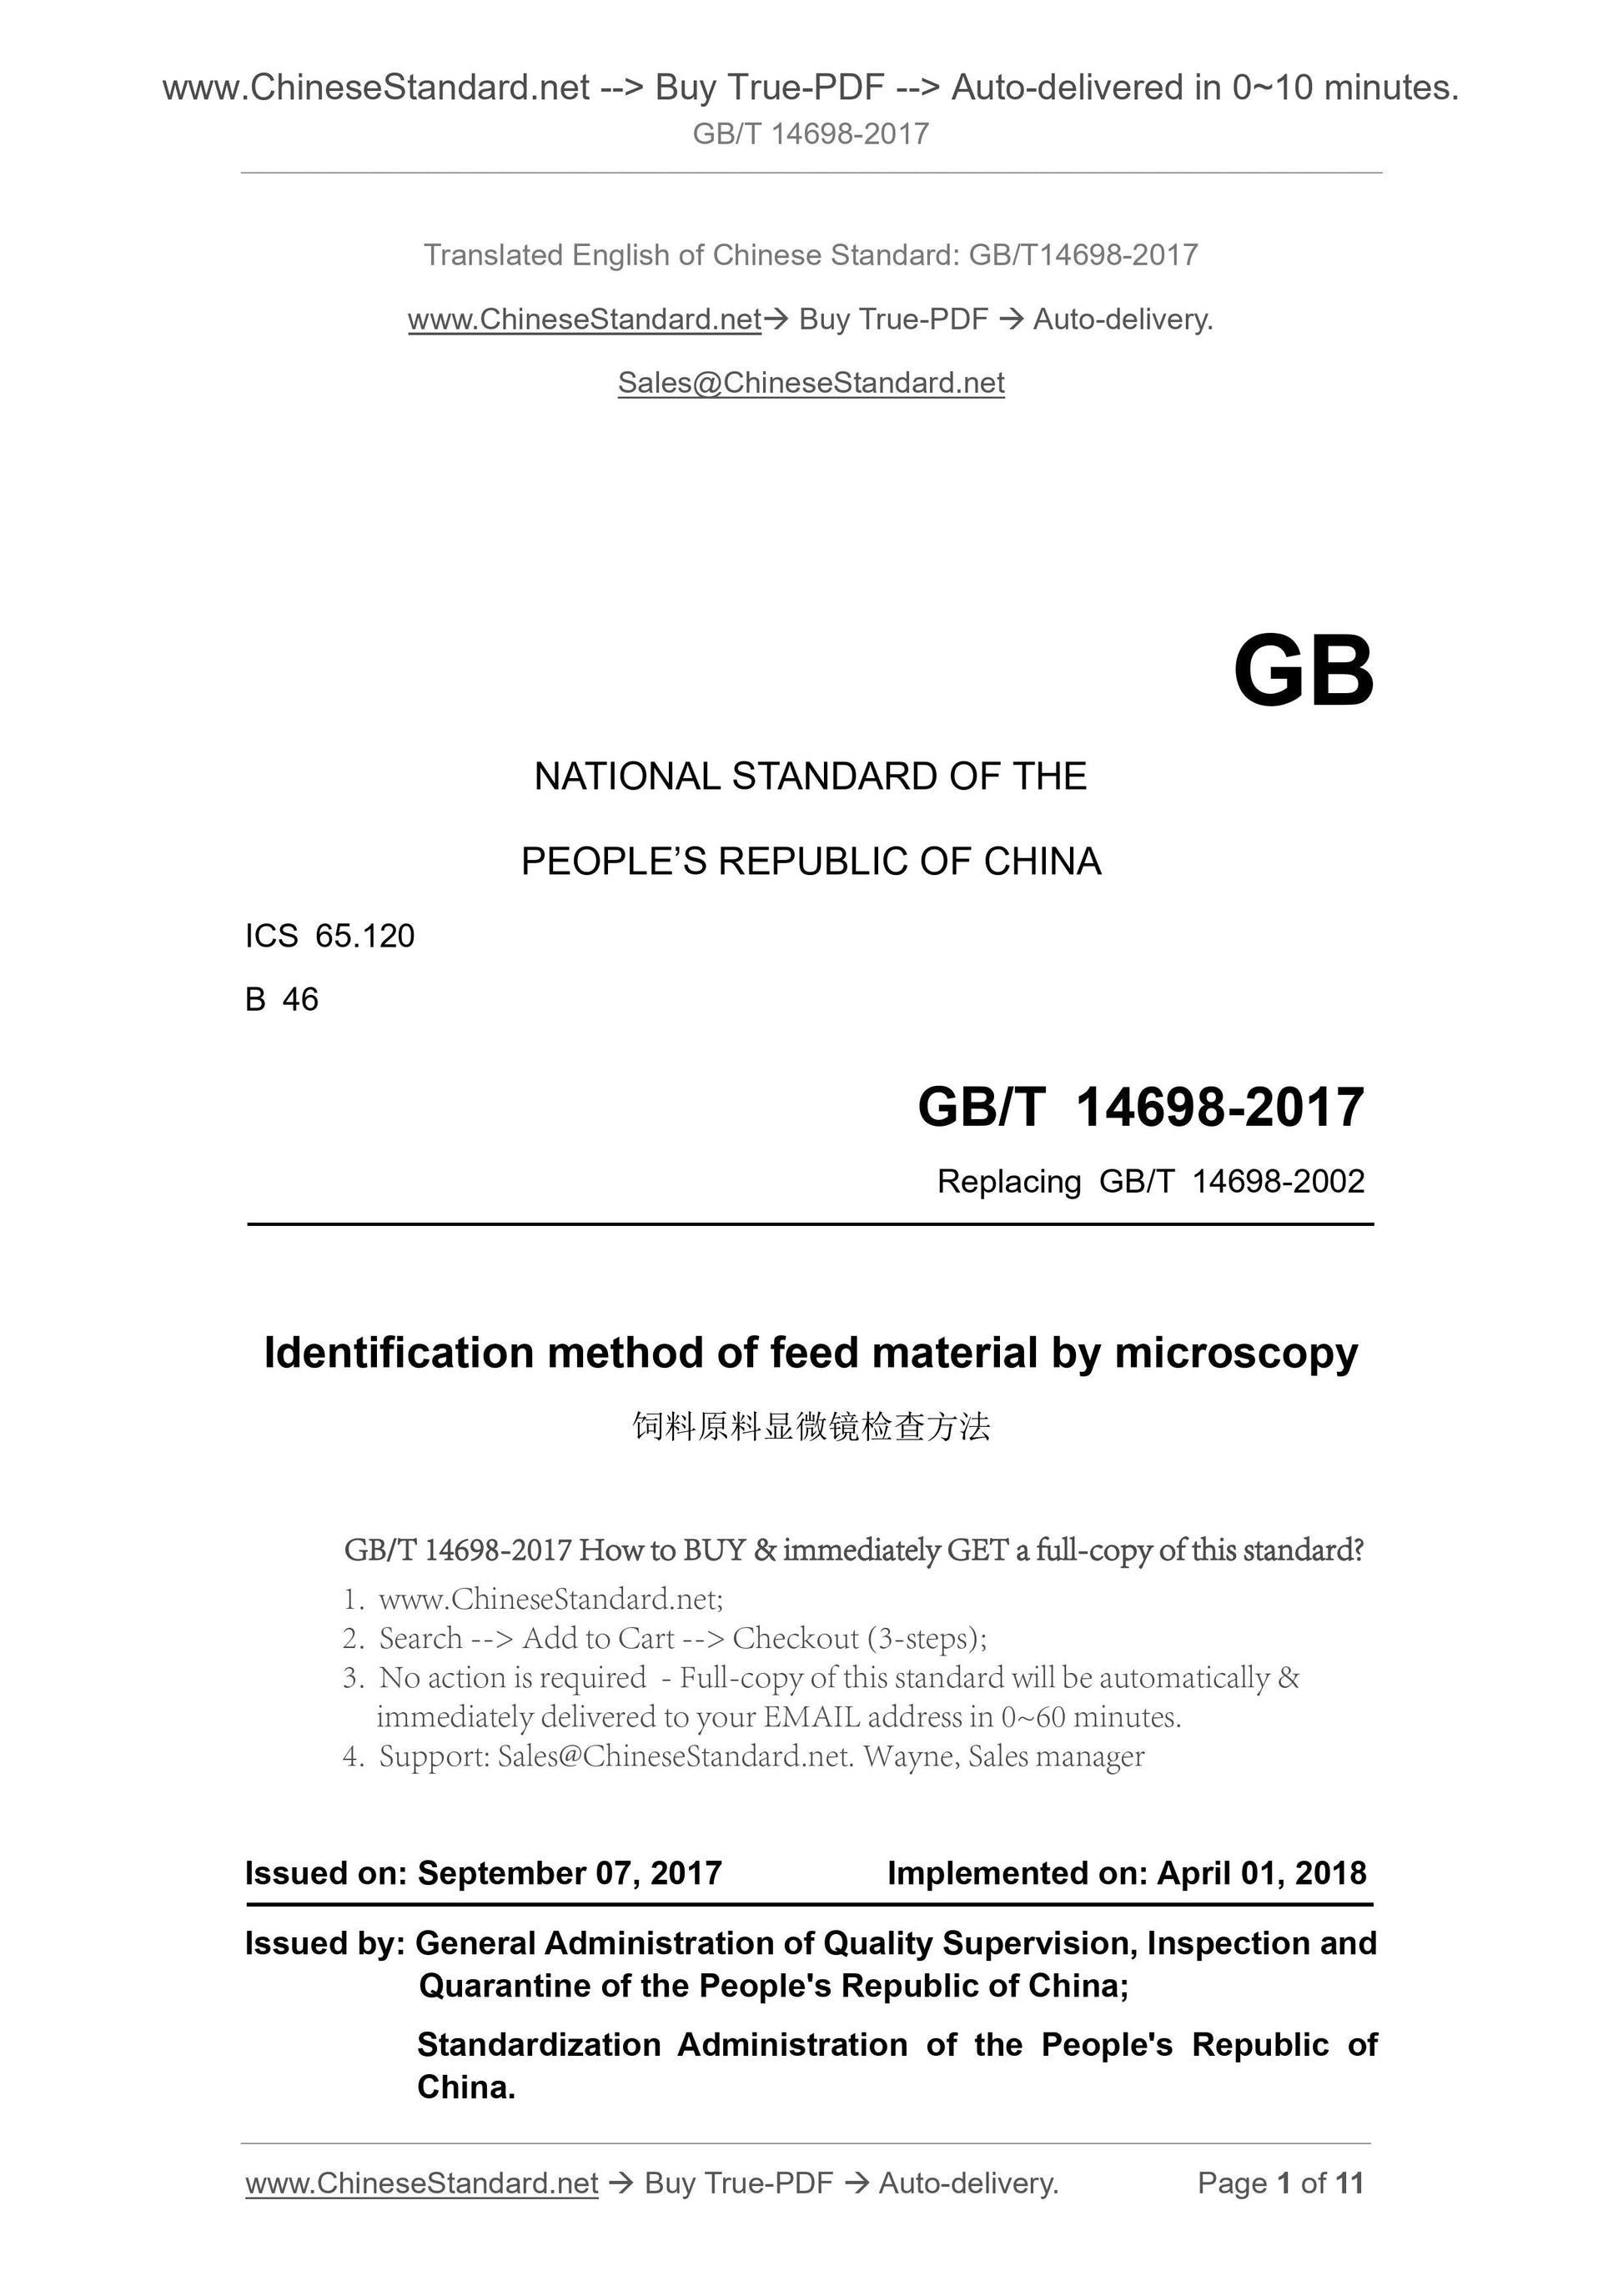 GB/T 14698-2017 Page 1